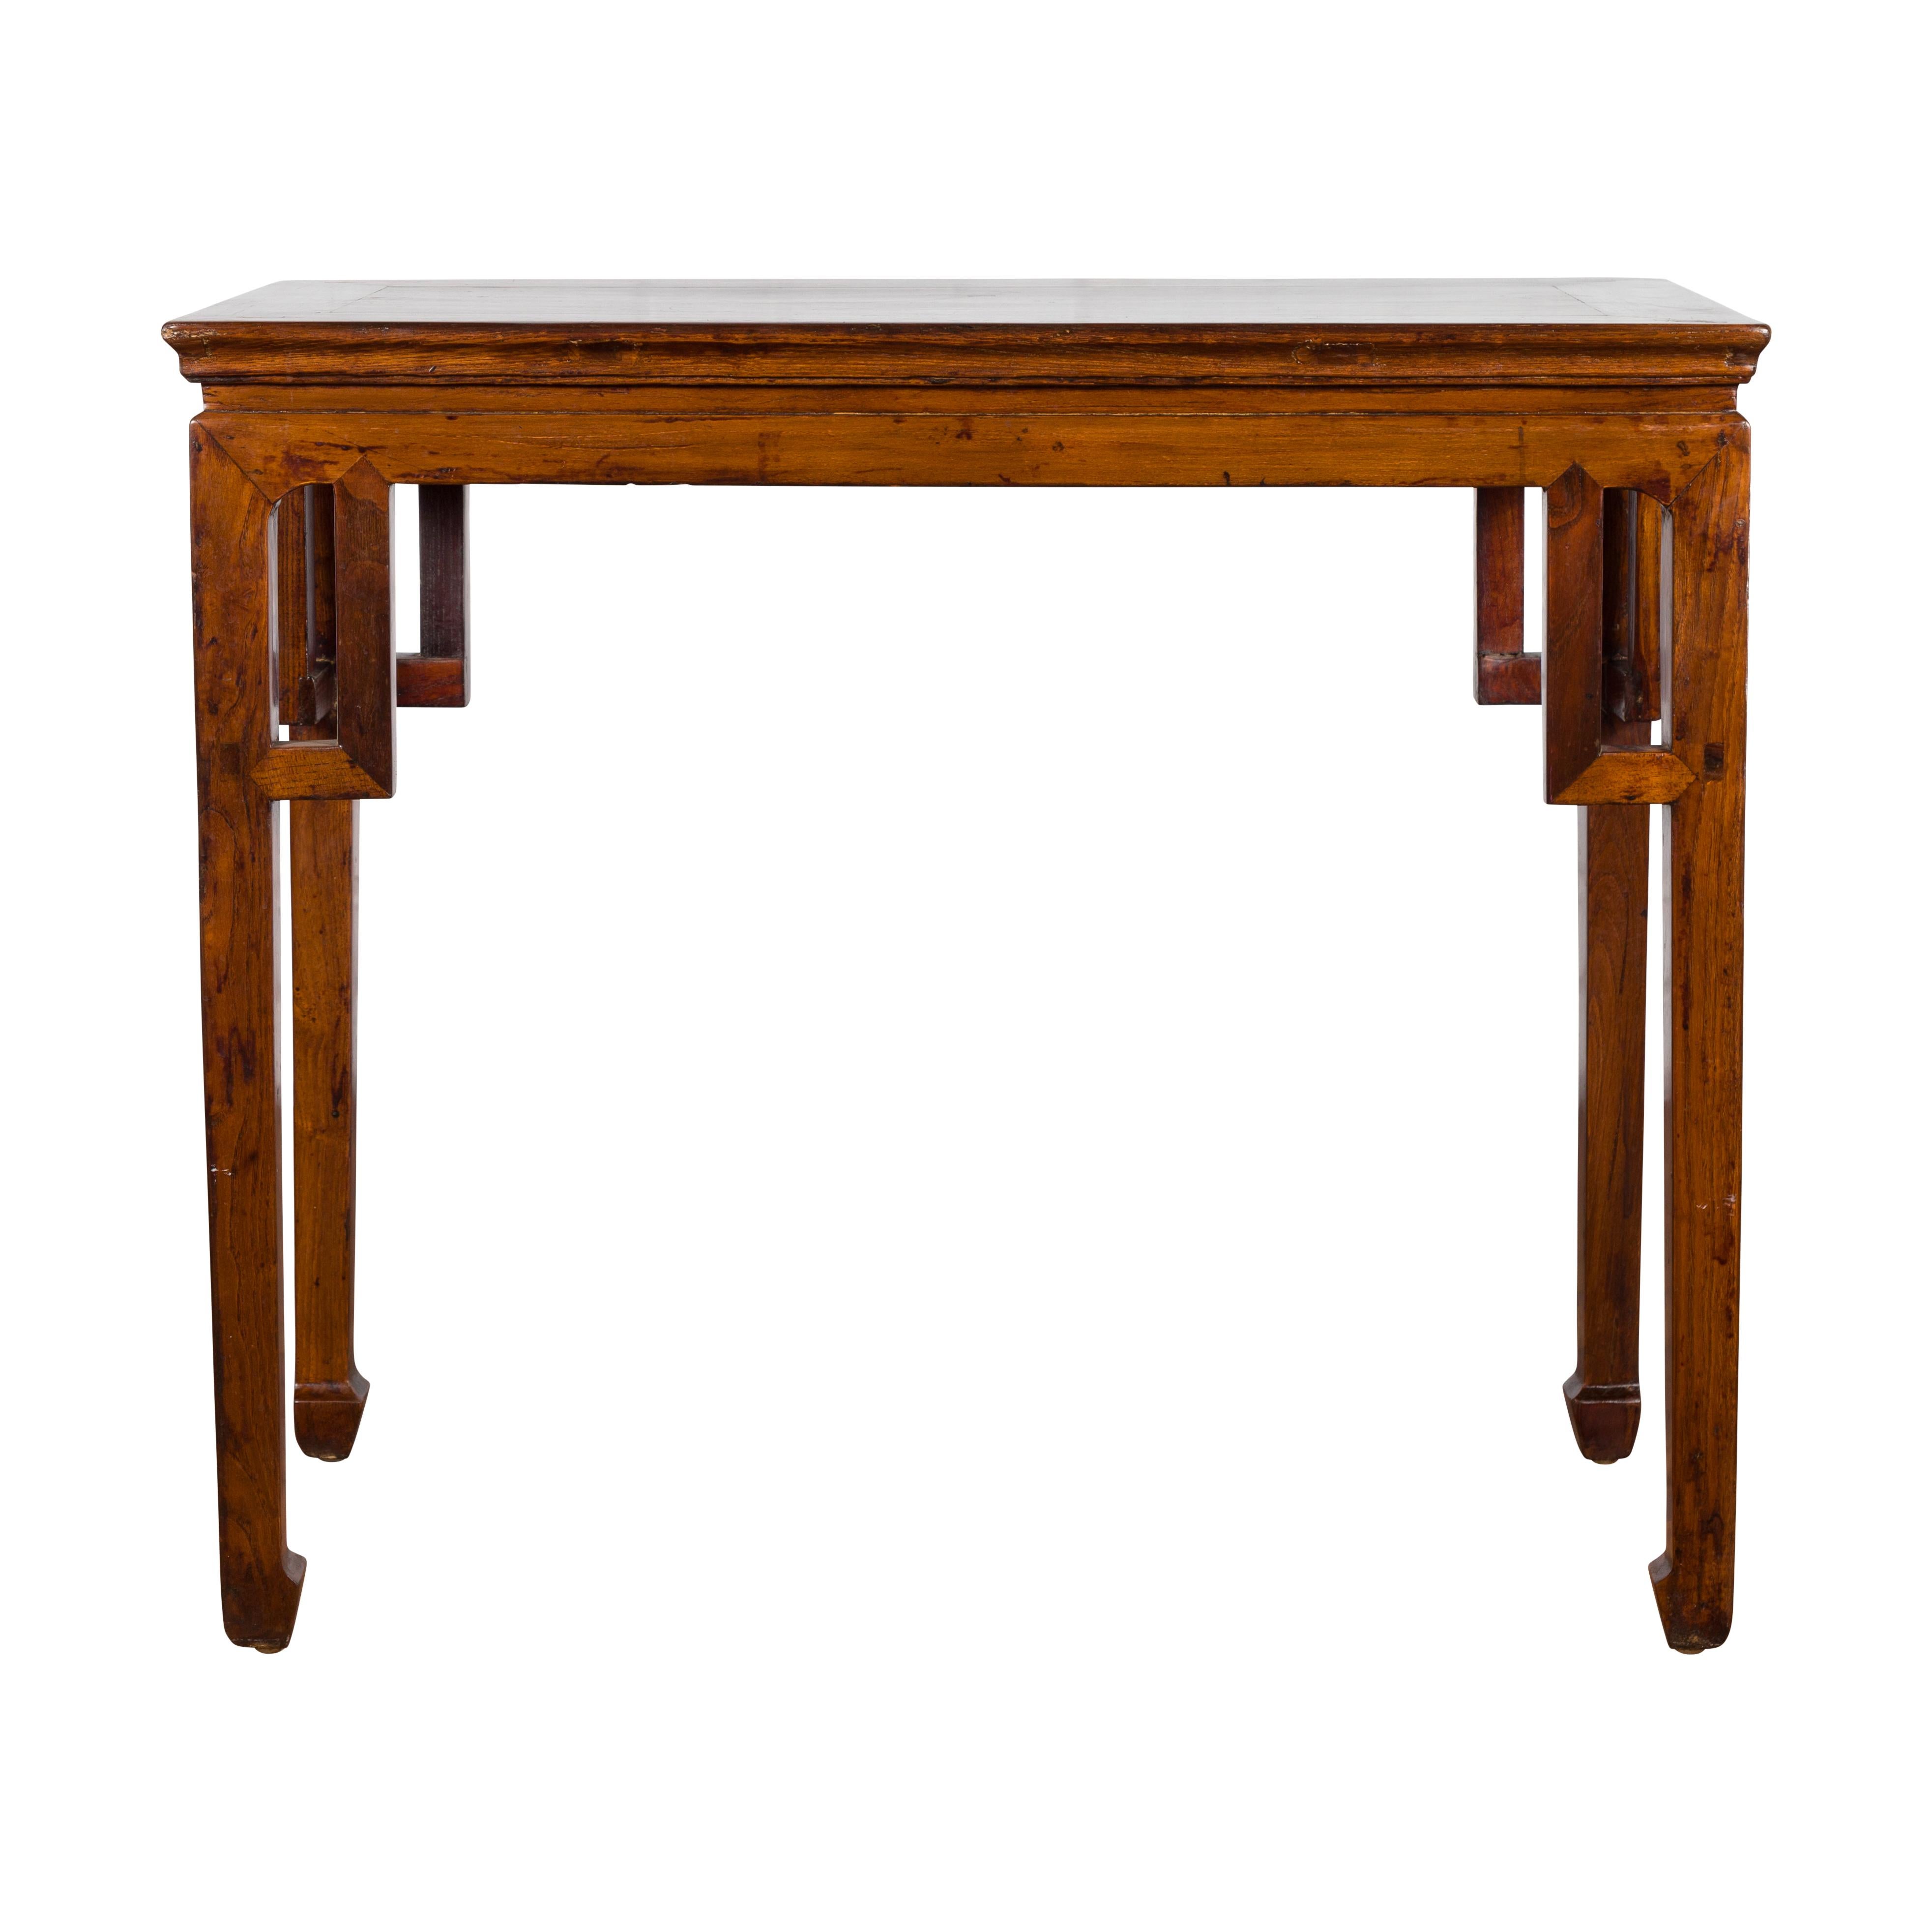 A Chinese Qing Dynasty period wooden wine table from the 19th century, with linear spandrels and horse hoof feet. Created in China during the Qing Dynasty, this wine table features a rectangular waisted top sitting above four straight legs connected